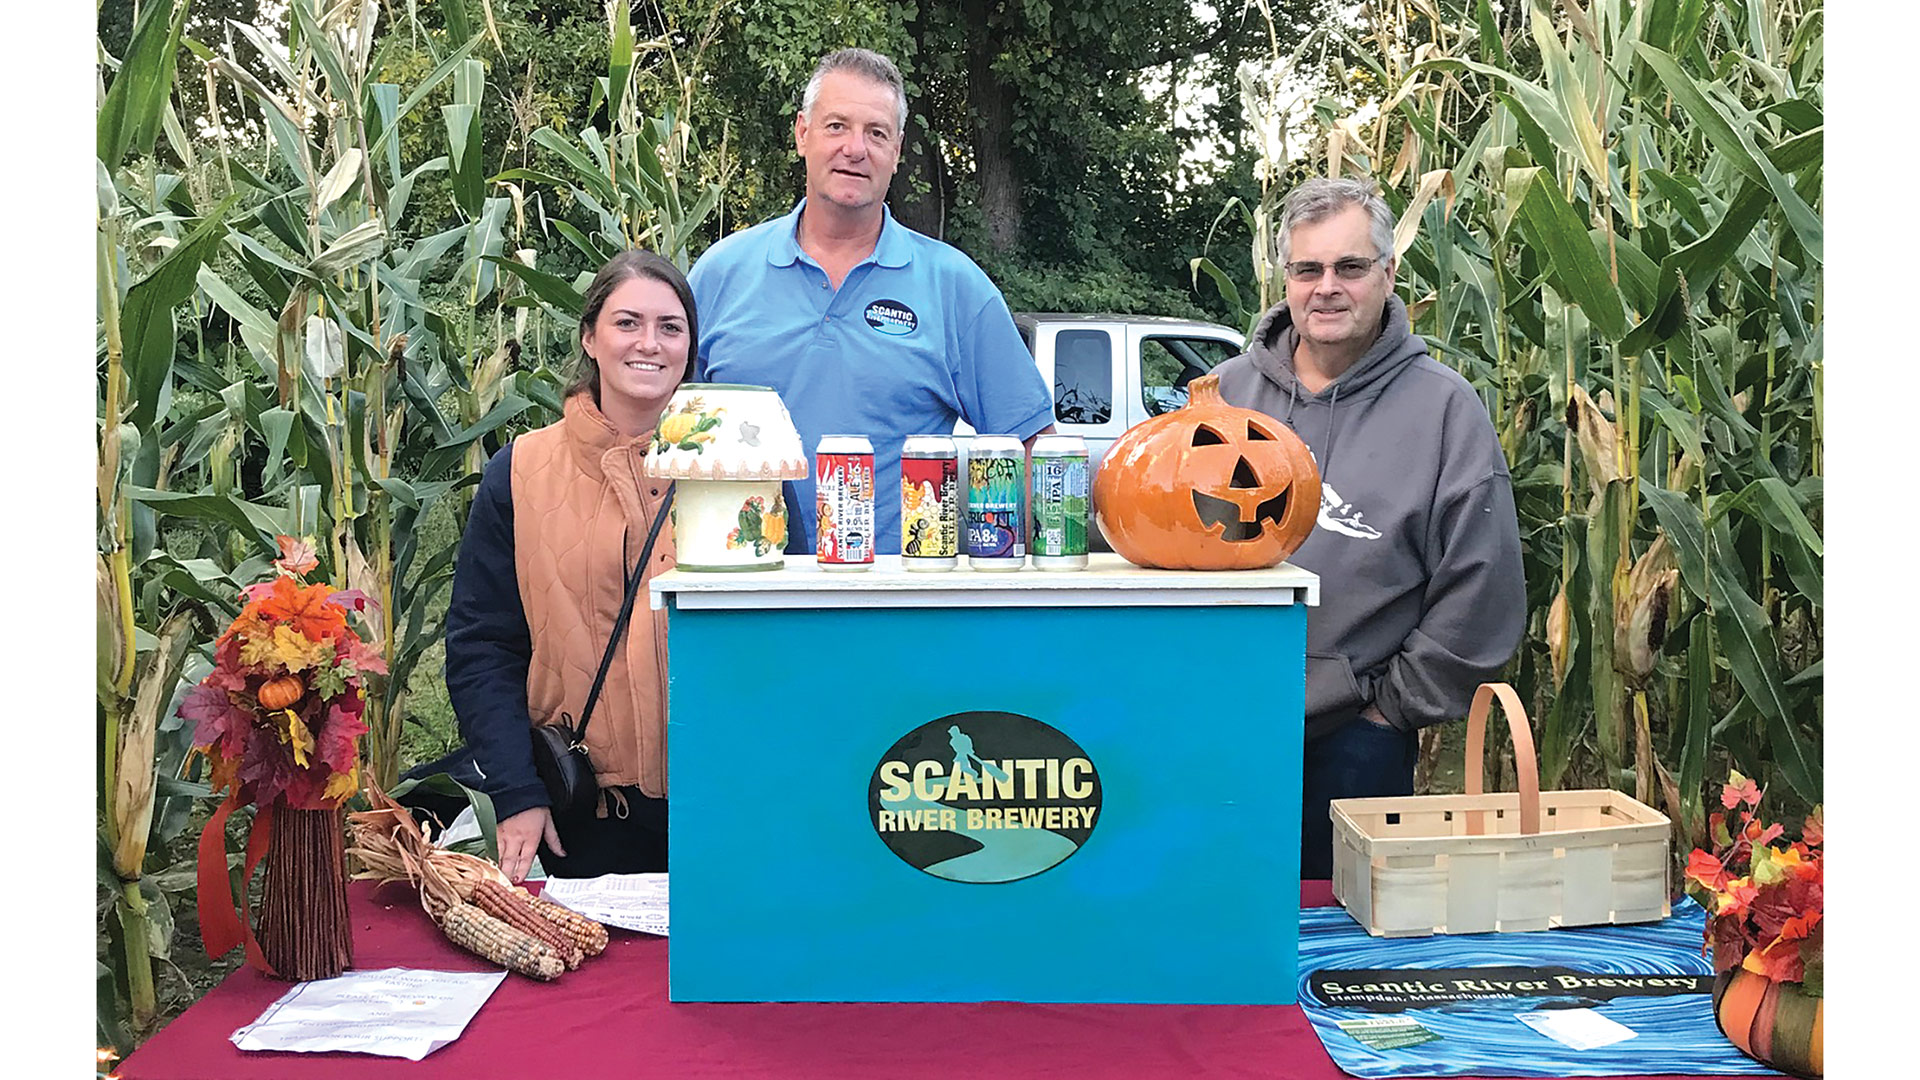 Scantic River Brewery owners